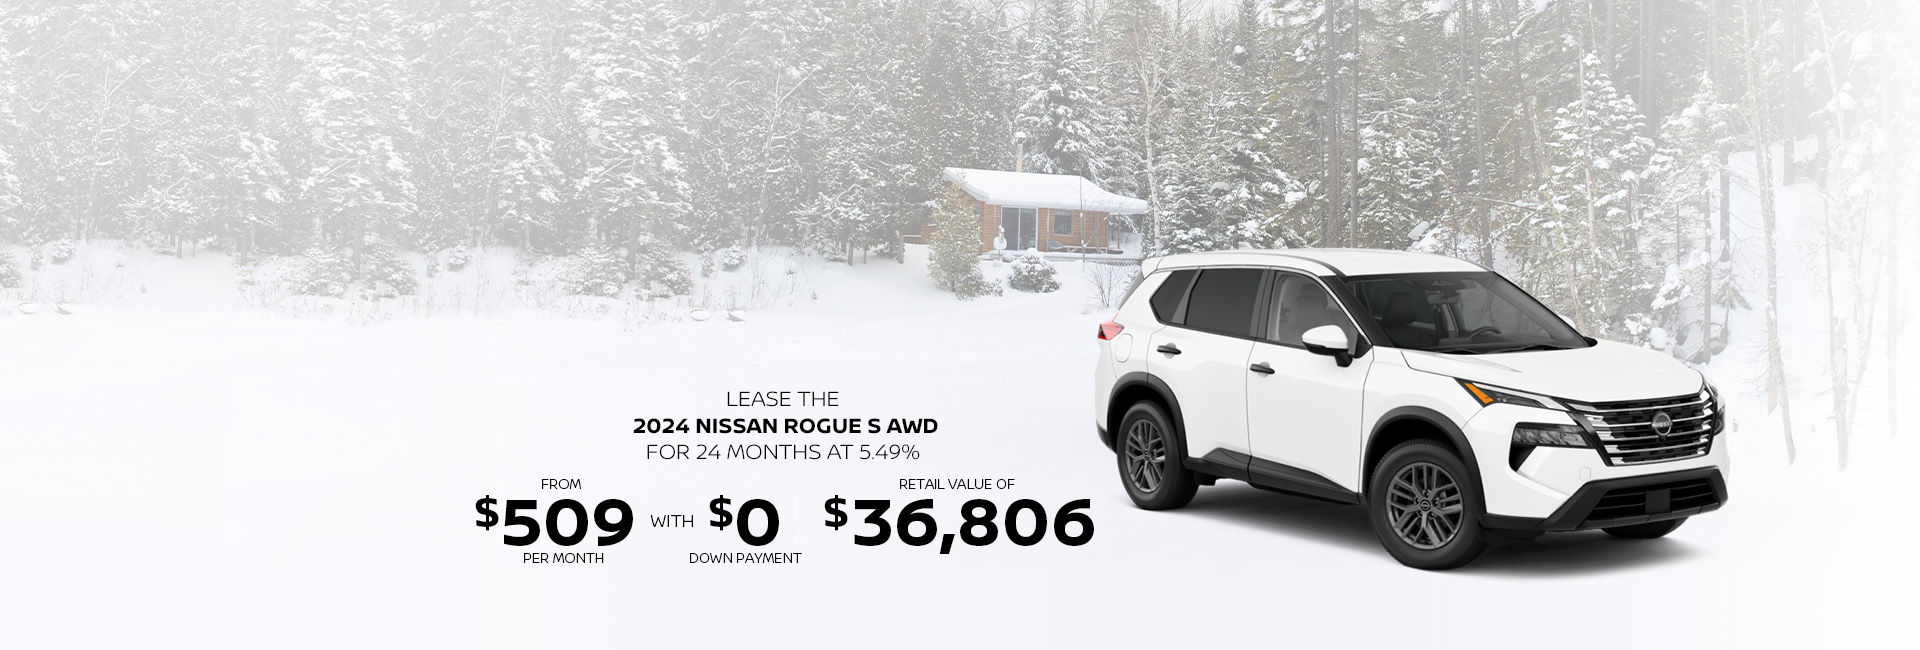 The 2024 Rogue S AWD